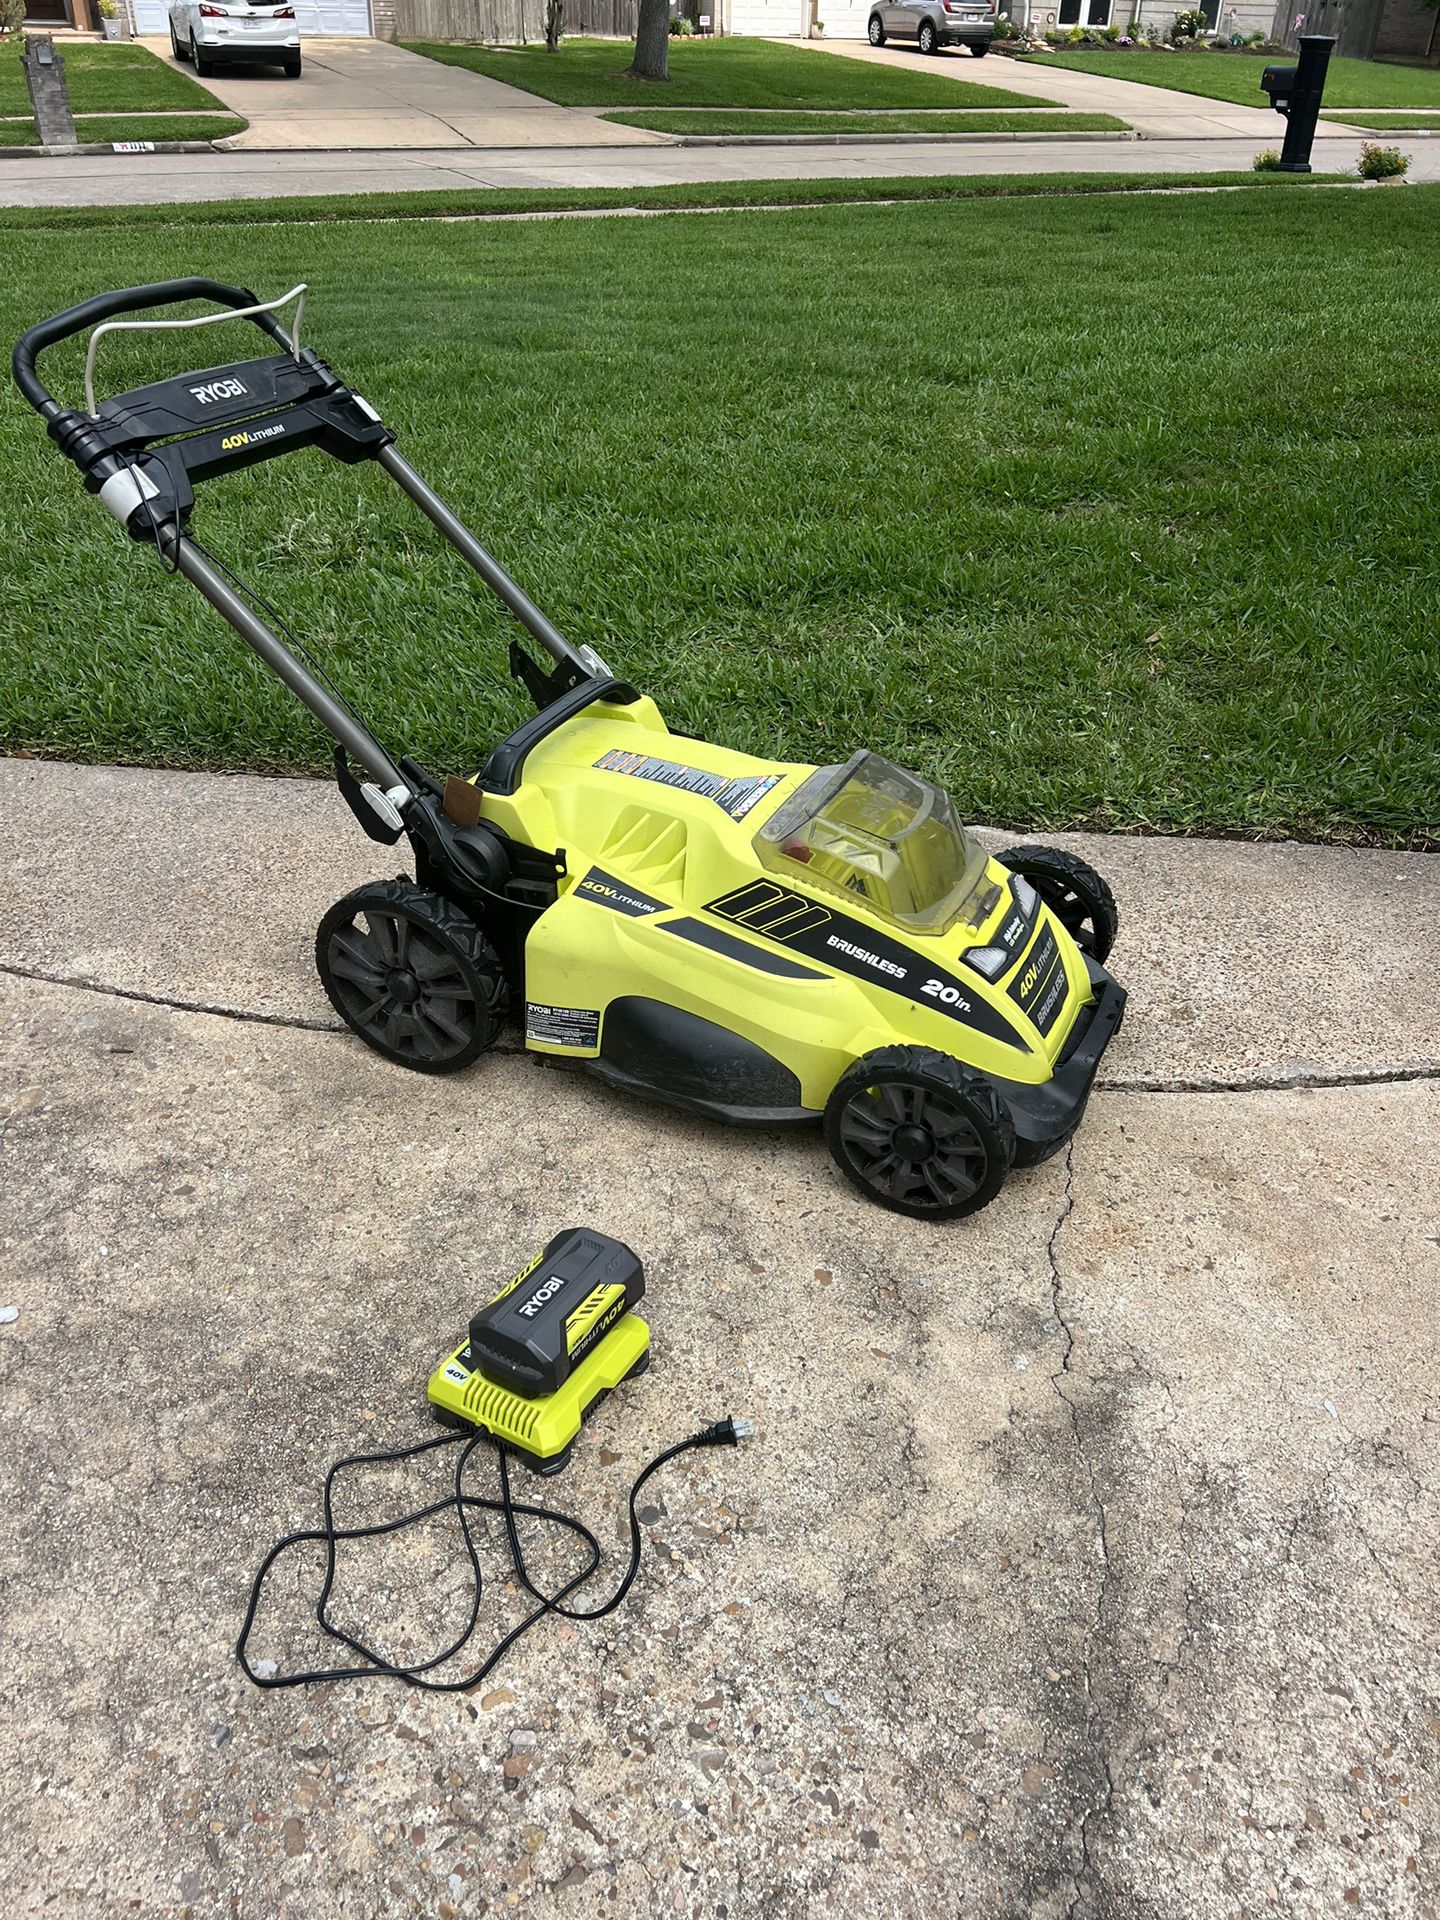 RYOBI Lawn Mower 20 in. Battery powered 40-Volt Lithium-Ion Brushless Cordless Walk Behind